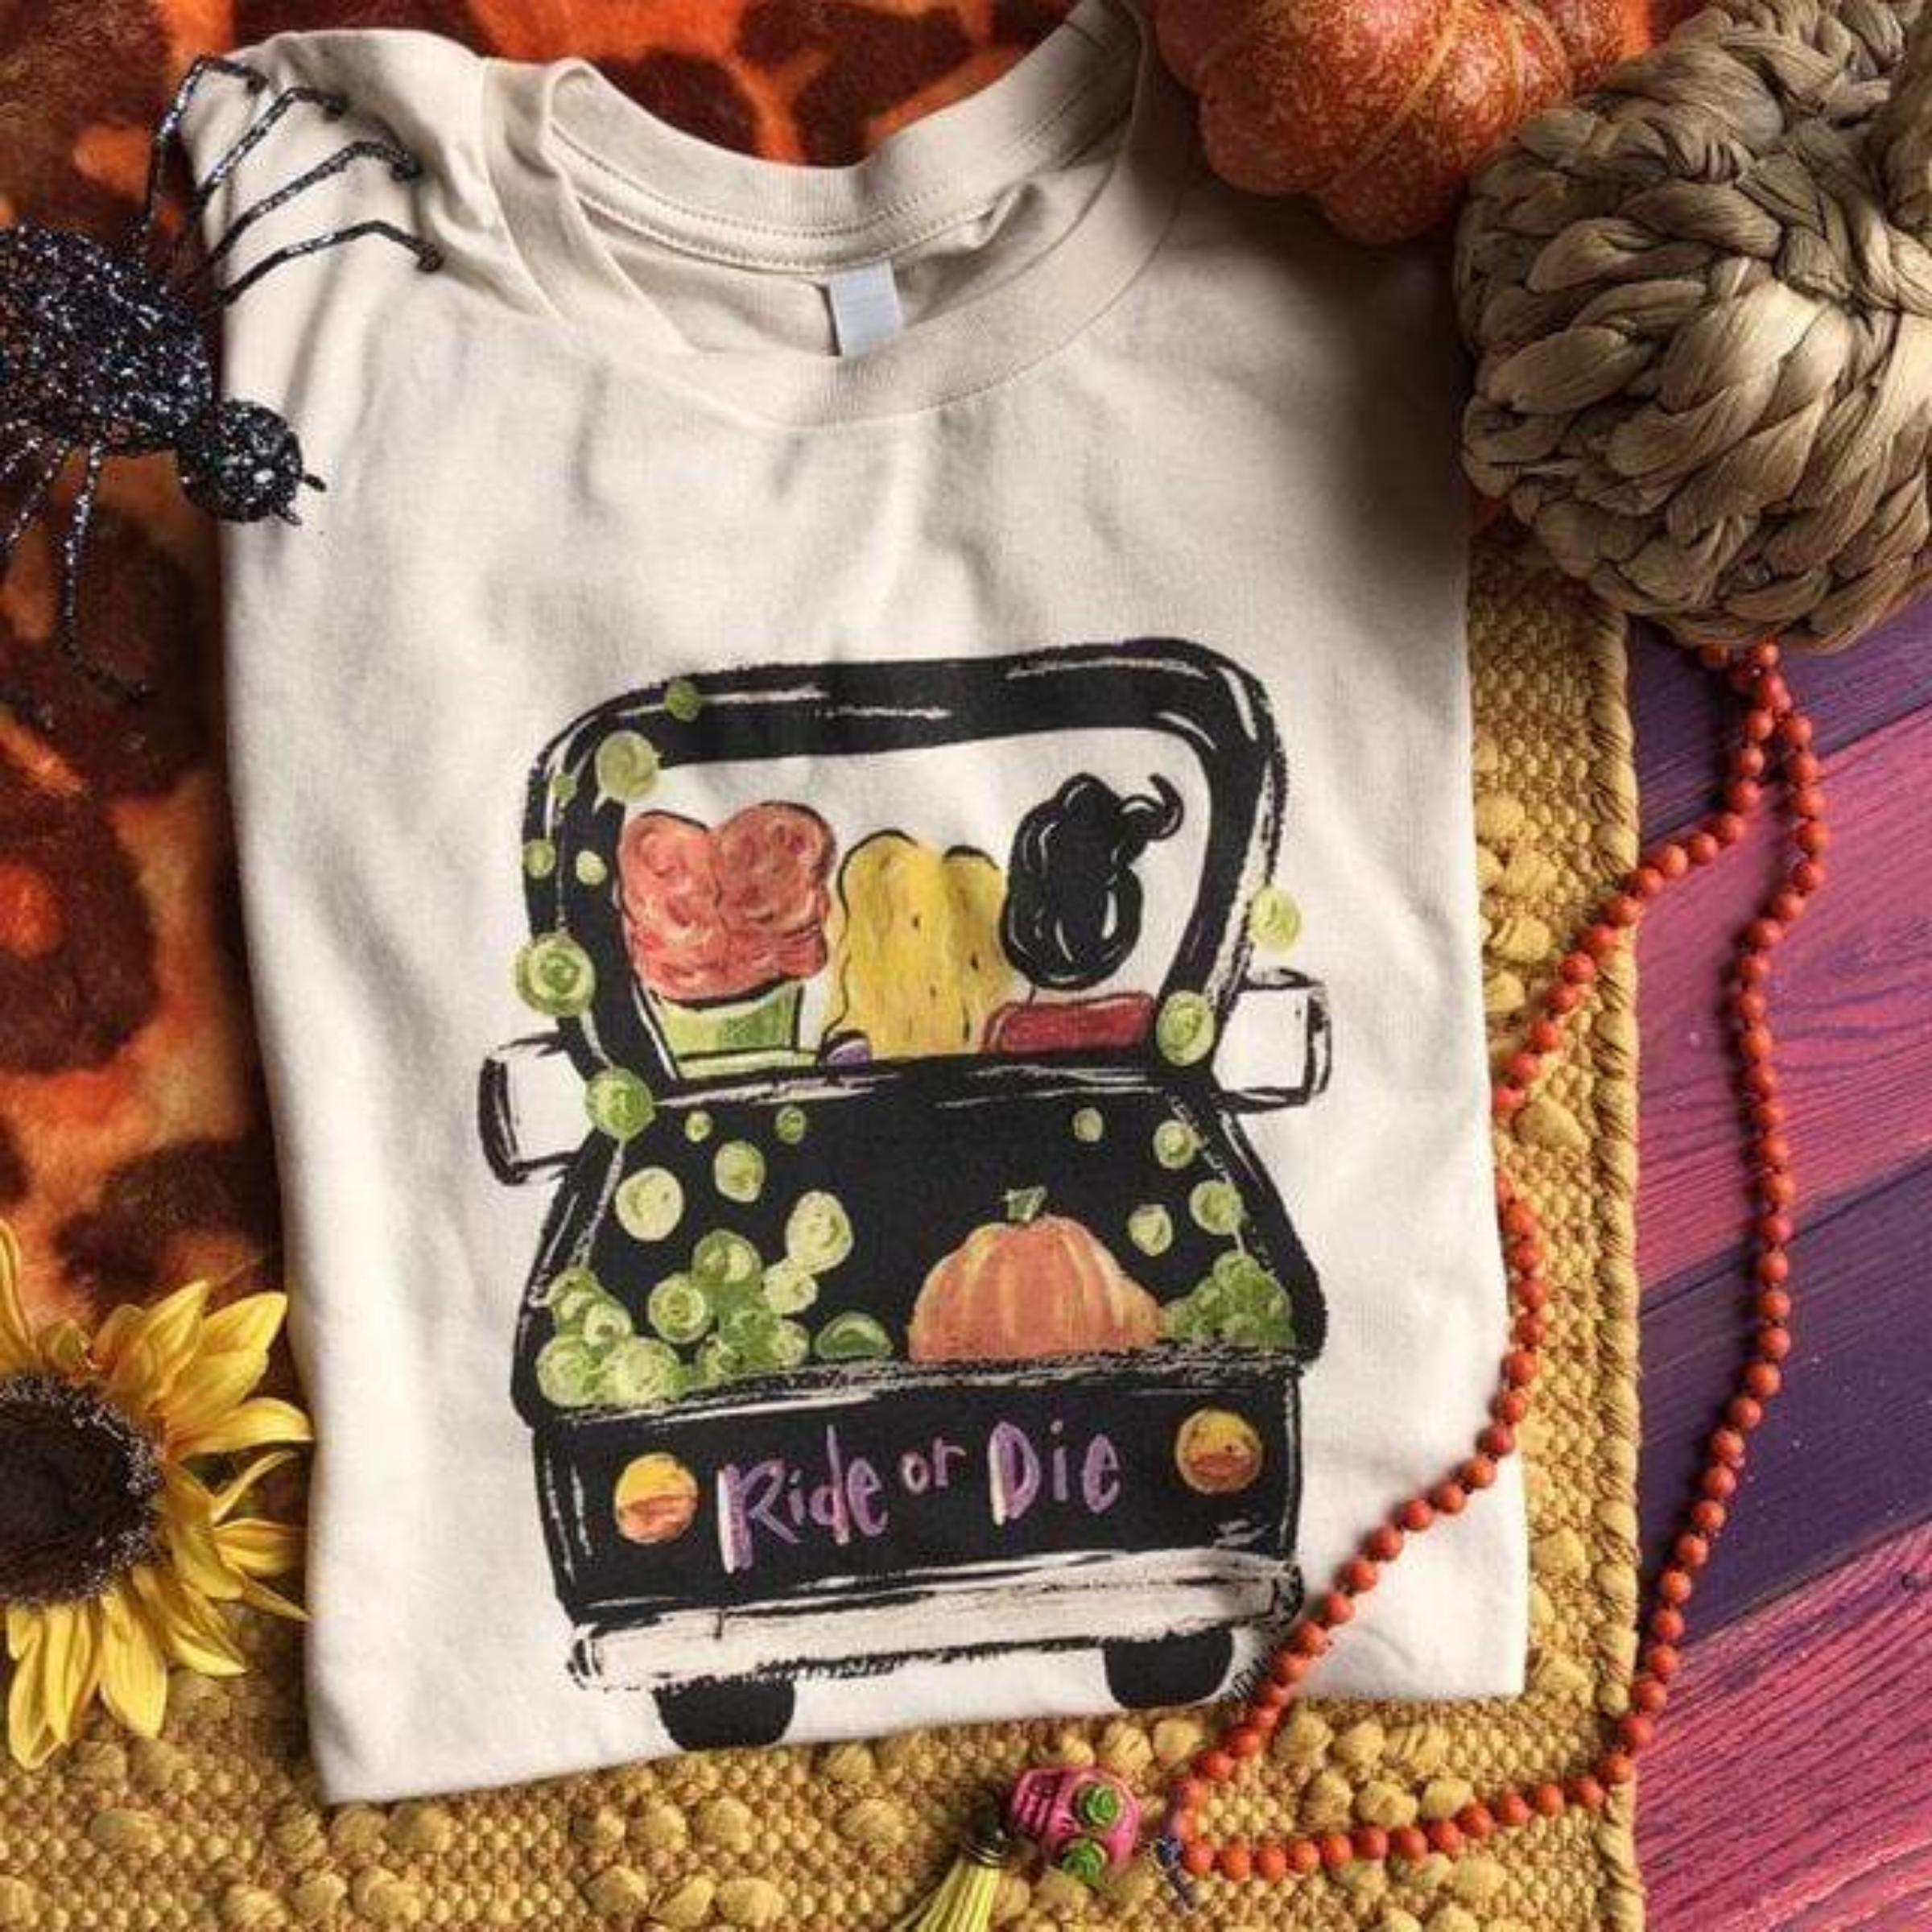 This is a cream t-shirt with a black truck on it with 3 girls inside the truck. On the back of the truck its says ride or die with a pumpkin and green gourds in the bed of truck. There is two decorative pumpkins, a glittered spider and a sunflower in the background of this picture.